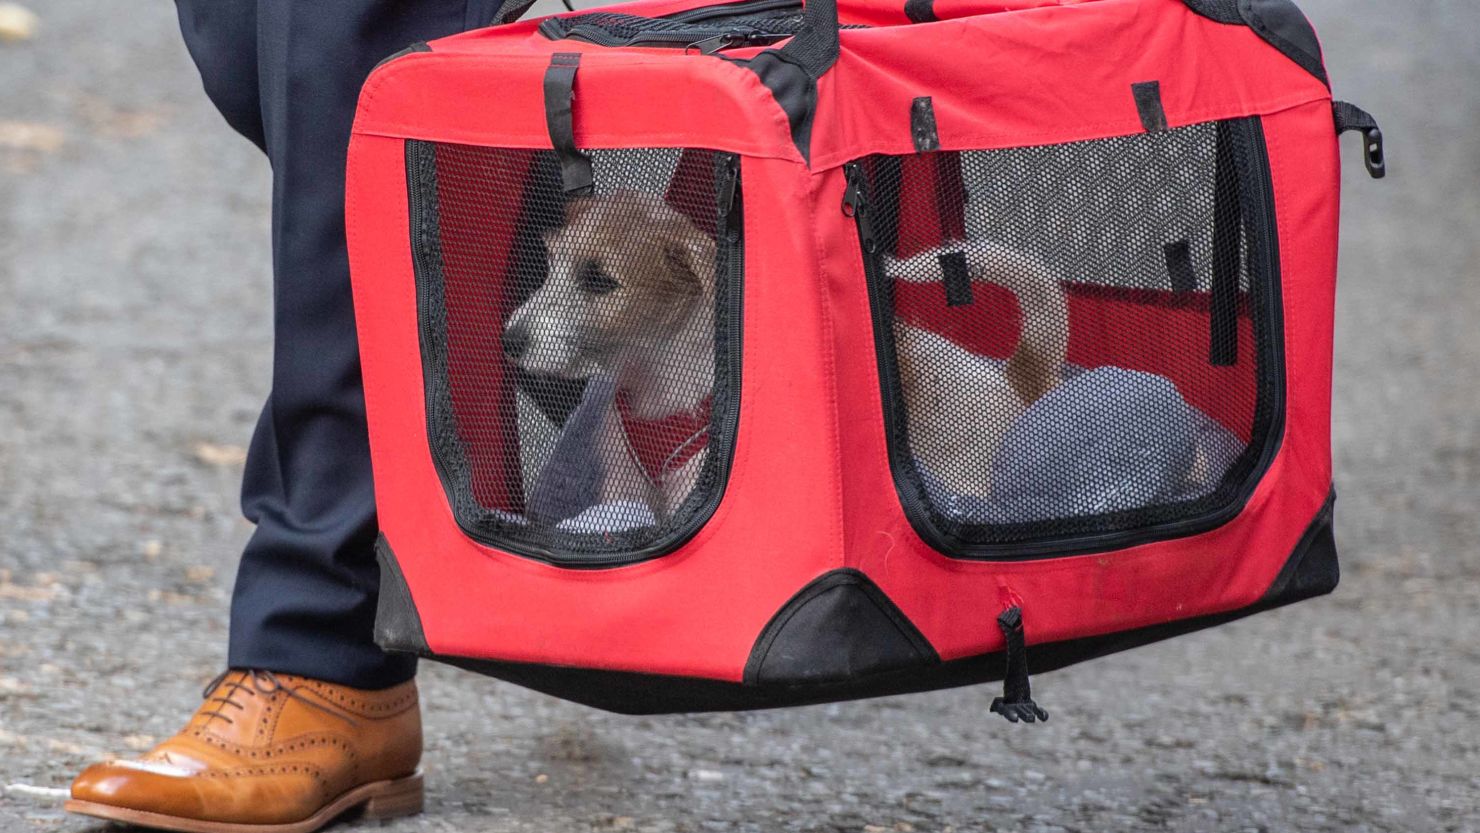 The new Downing Street dog arrives at Number 10.